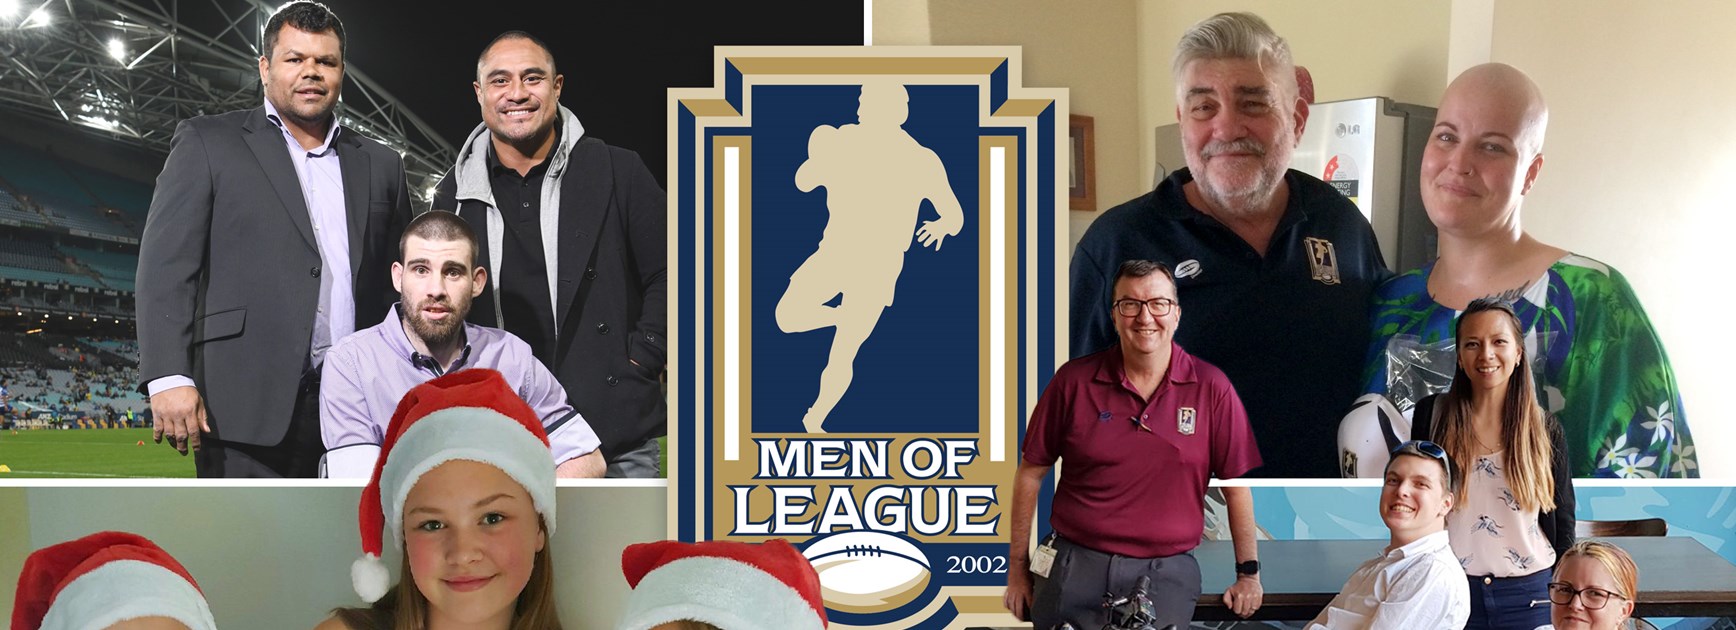 The Men of League Foundation continues to change lives